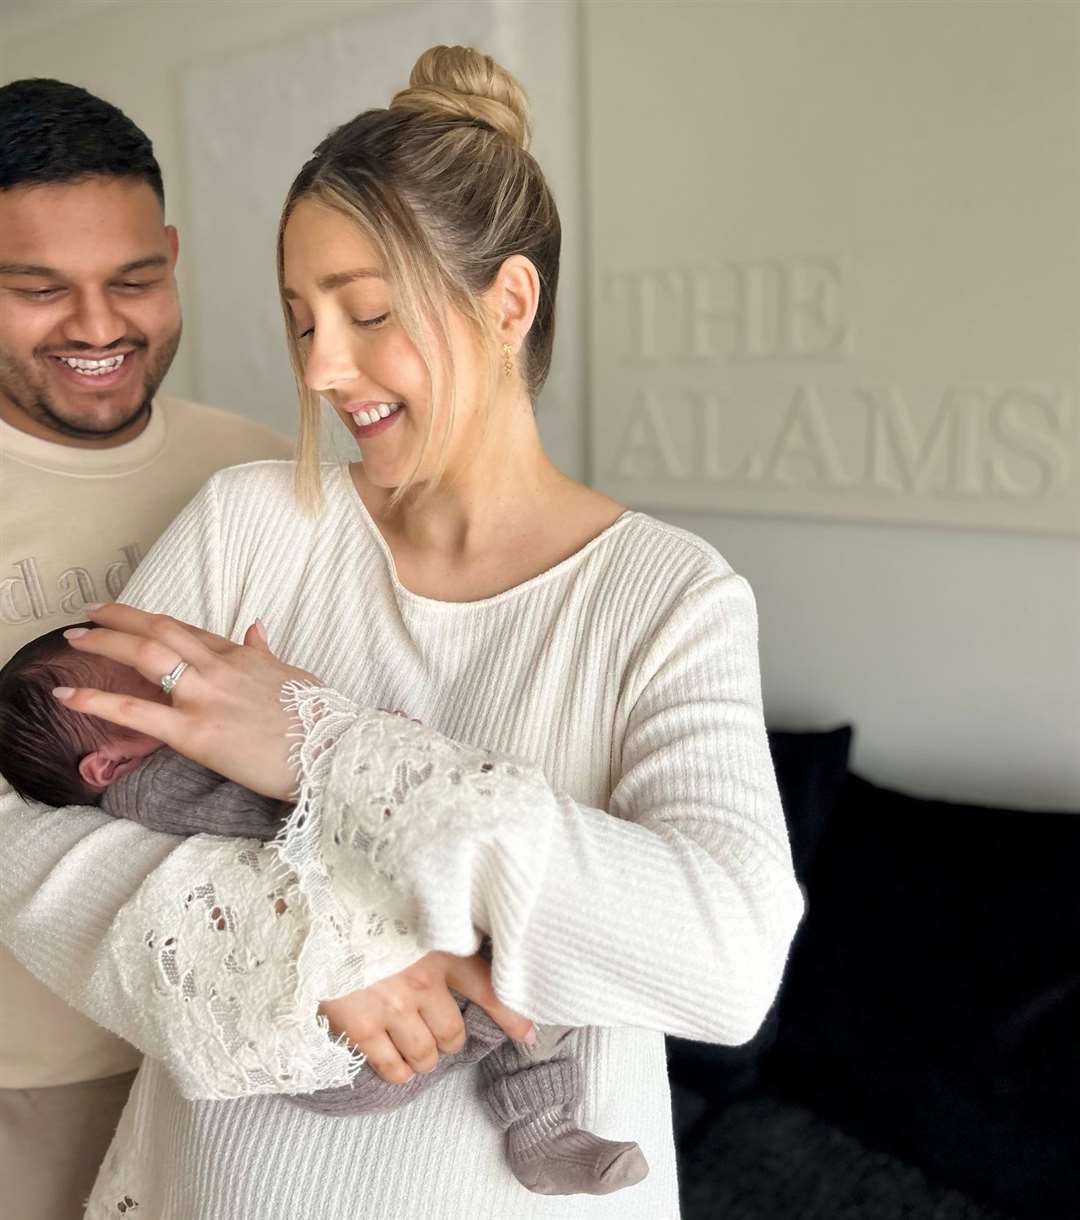 The couple recently welcomed their first baby during the re-fit. Photo courtesy of Mr and Mrs Alam